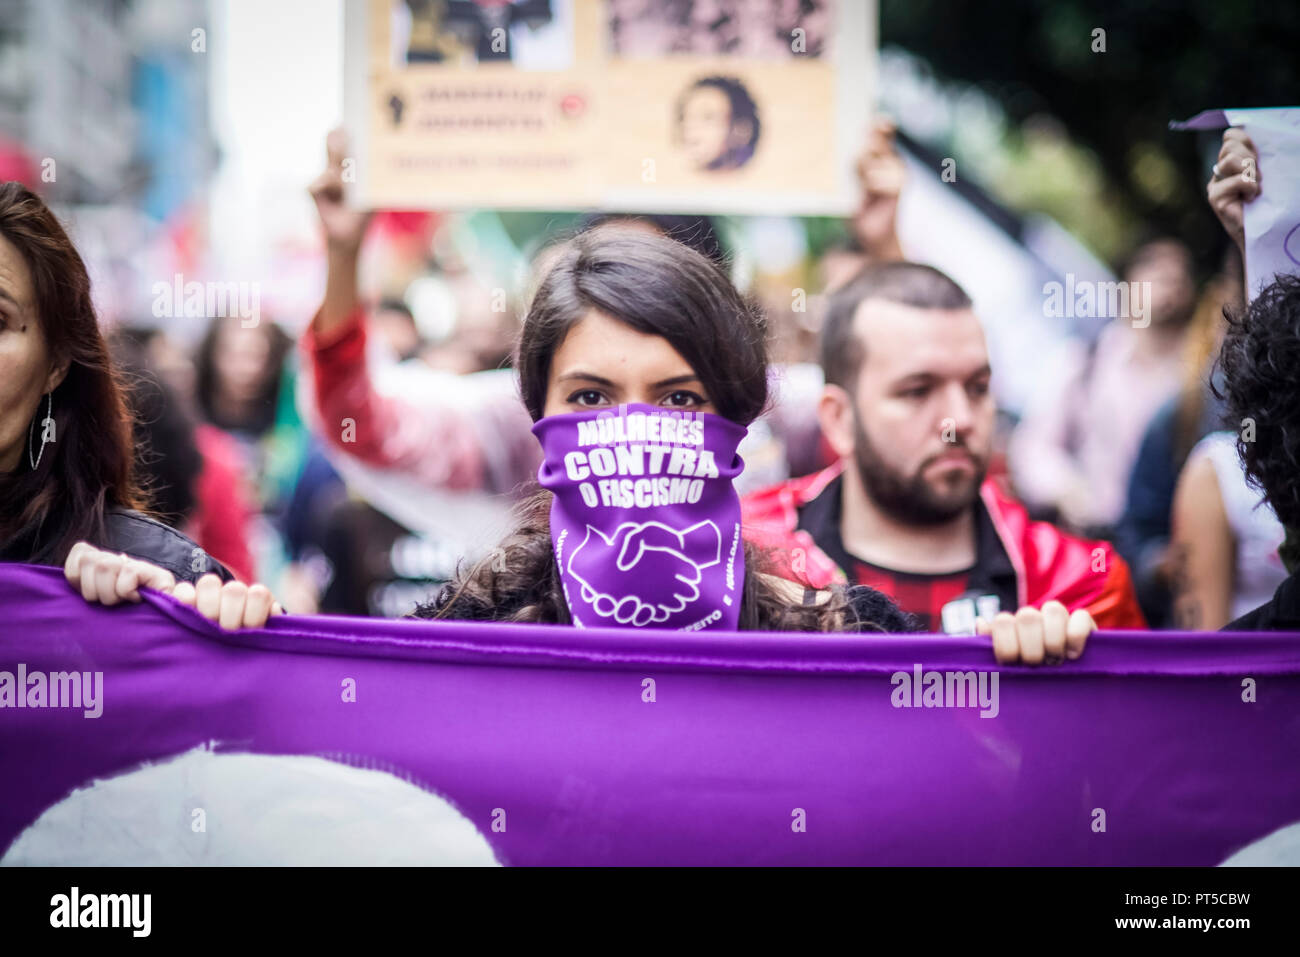 Sao Paulo, Brazil. 06th Oct, 2018. A woman wearing a scarf with the inscription 'Mulheres contra o fascismo' ('Women Against Fascism') takes part in a demonstration against the extreme right-wing presidential candidate Bolsonaro. Many people in Sao Paulo took to the streets against Bolsonaro and his racist, anti-woman and anti-gay course. In the midst of a severe crisis, Latin America's largest country elects a new president. On 07.10.2018 the ultra-right Bolsonaro and the left Haddad will be the favourites in the presidential elections. Credit: Pablo Albarenga/dpa/Alamy Live News Stock Photo